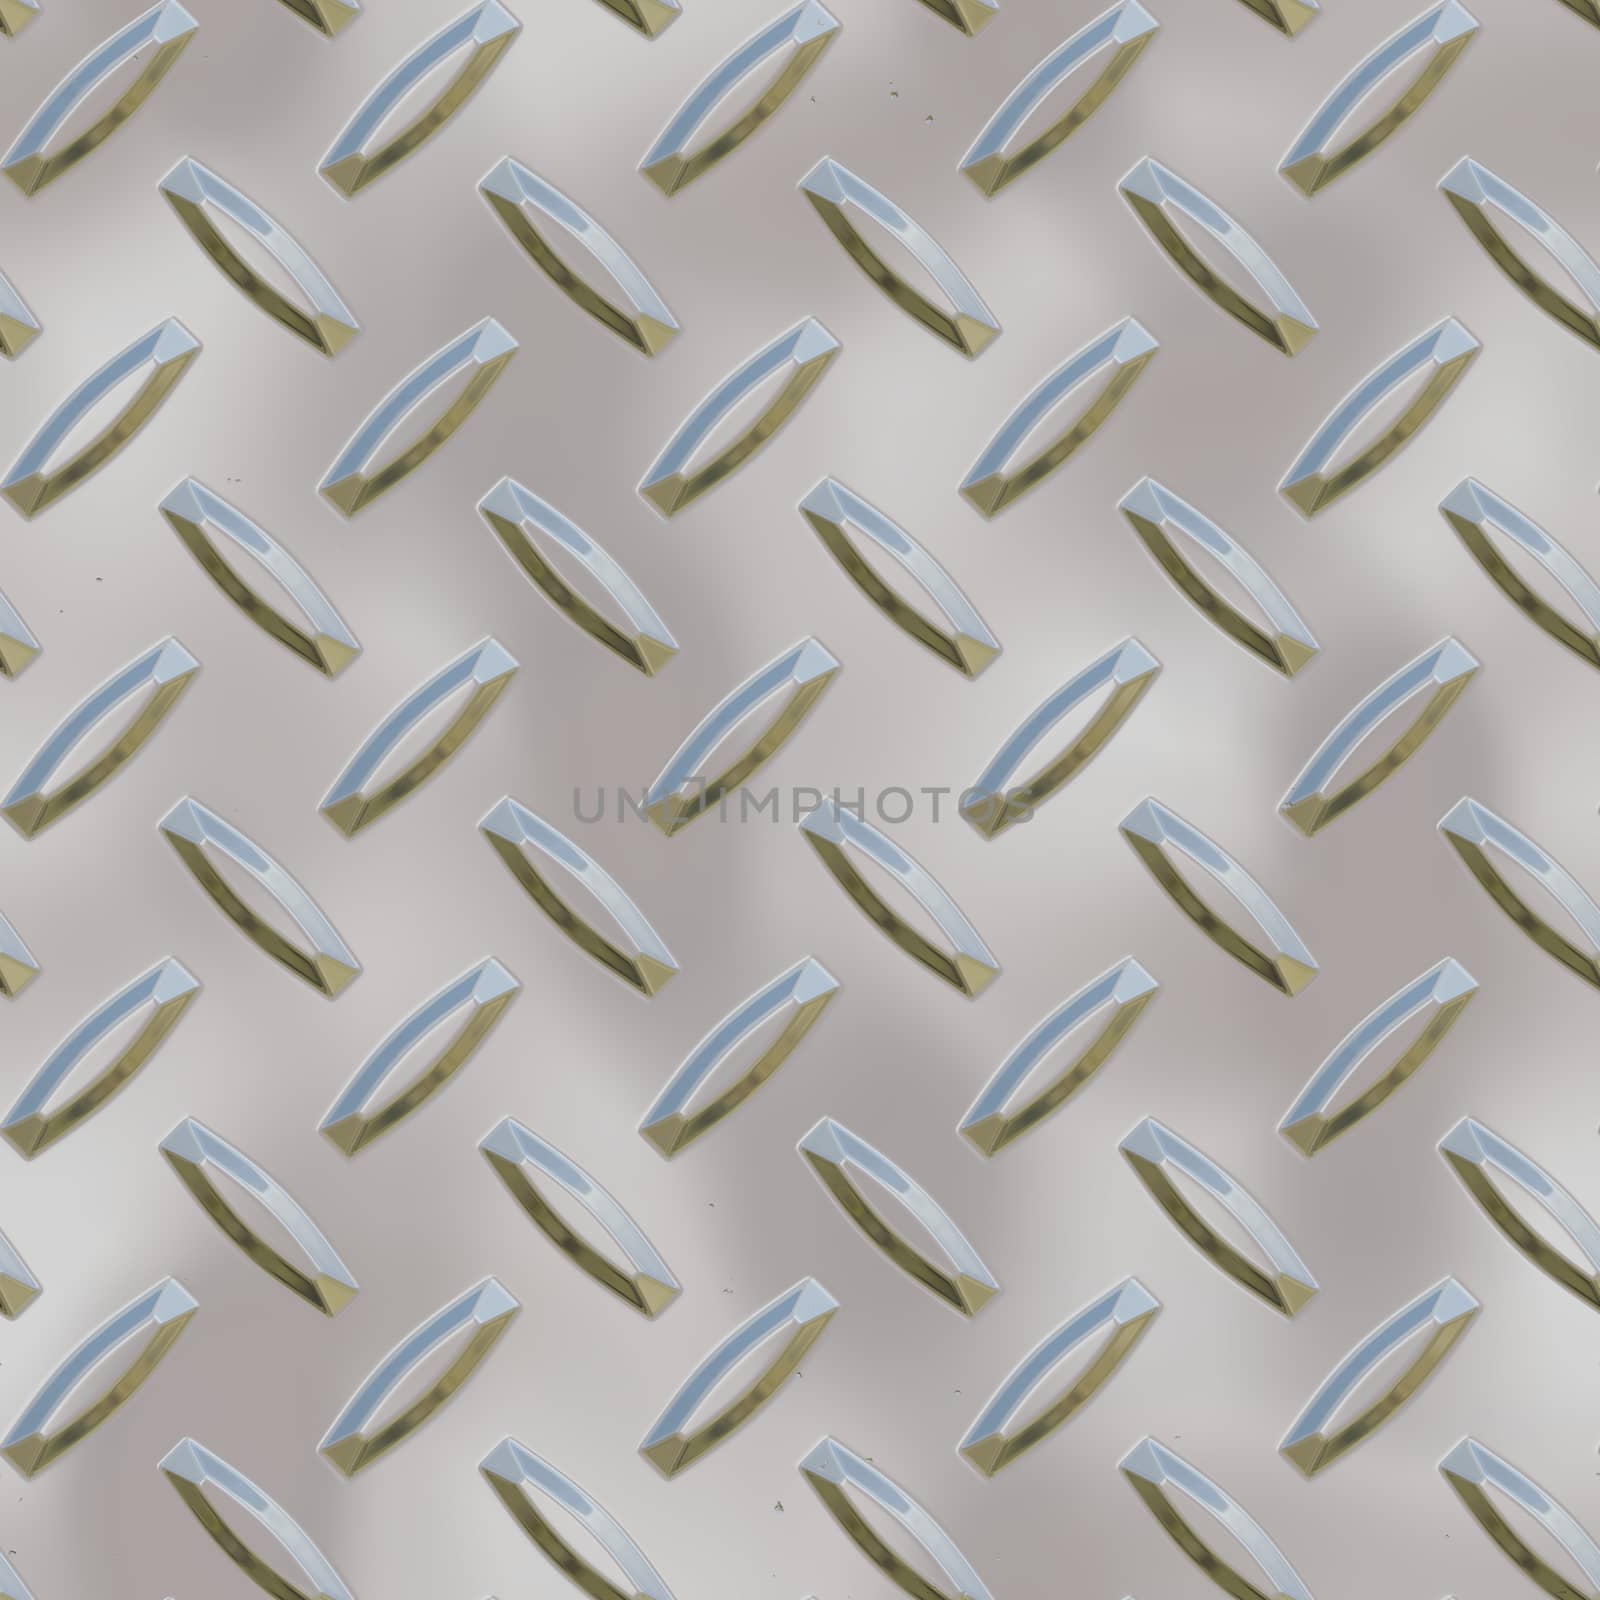 Silver Metal Plate Seamless Texture by whitechild